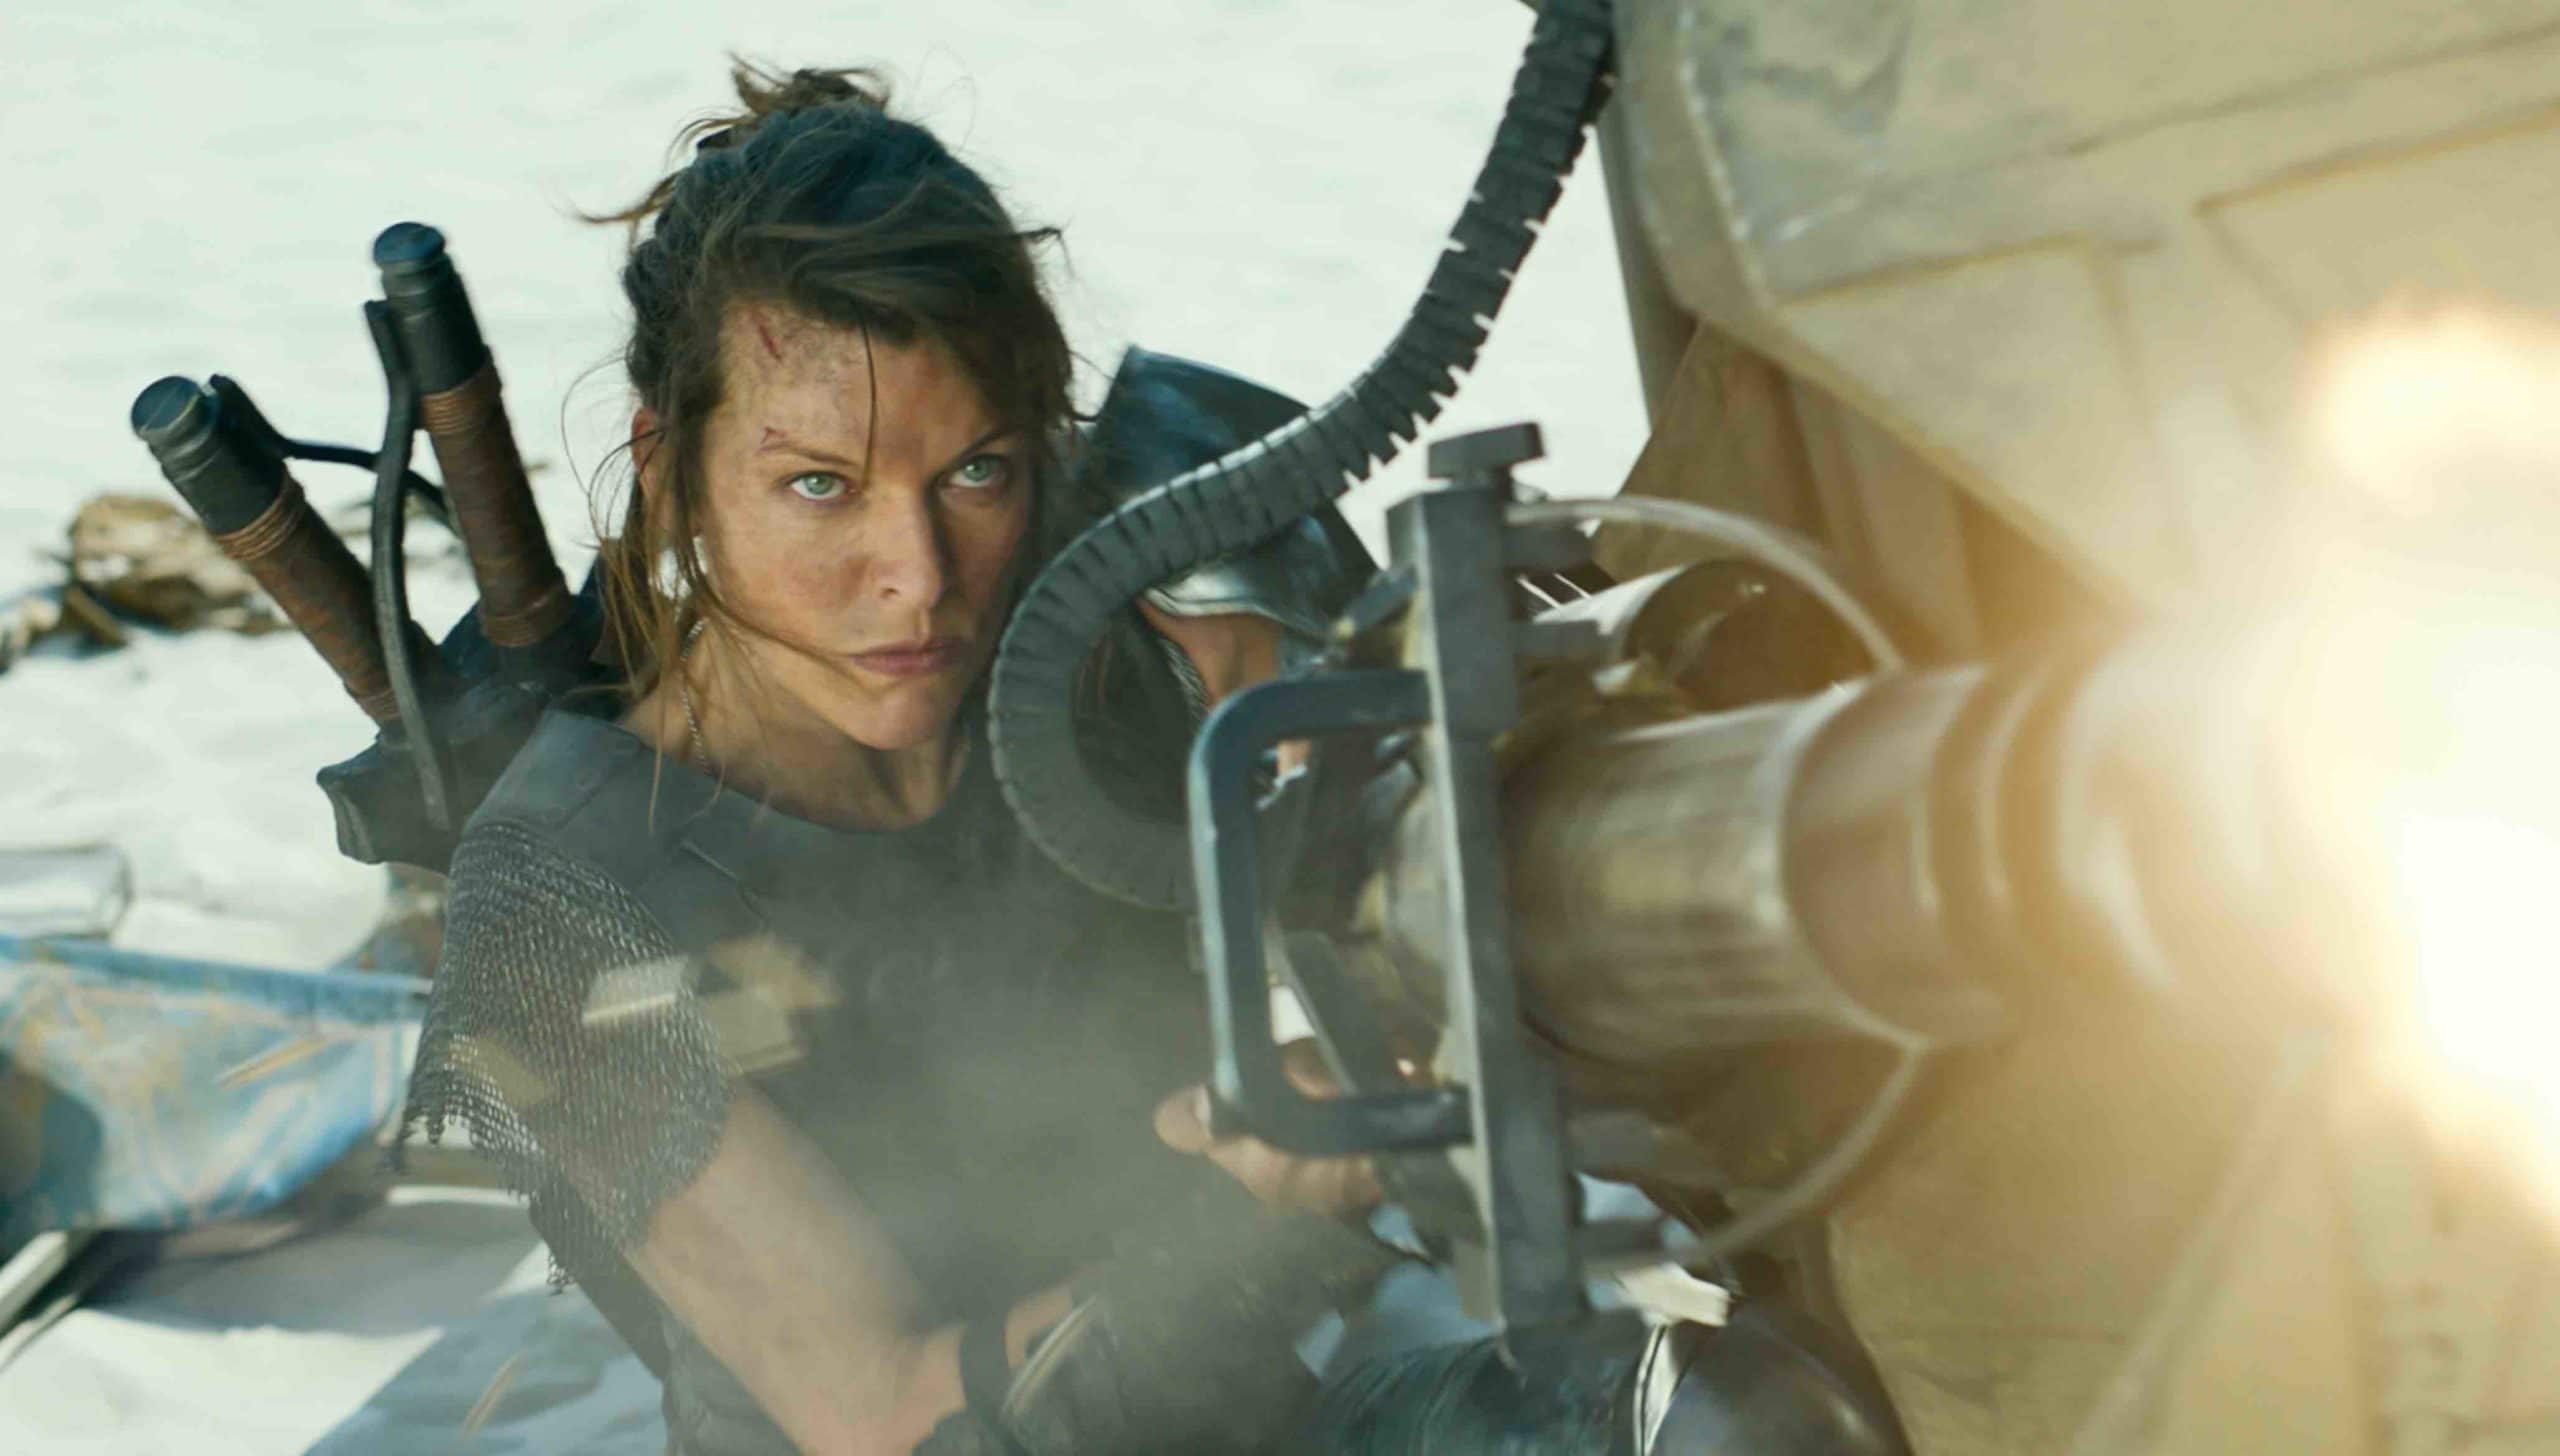 Milla Jovovich as Artemis in Monster Hunter - Photo Credit: Sony Pictures